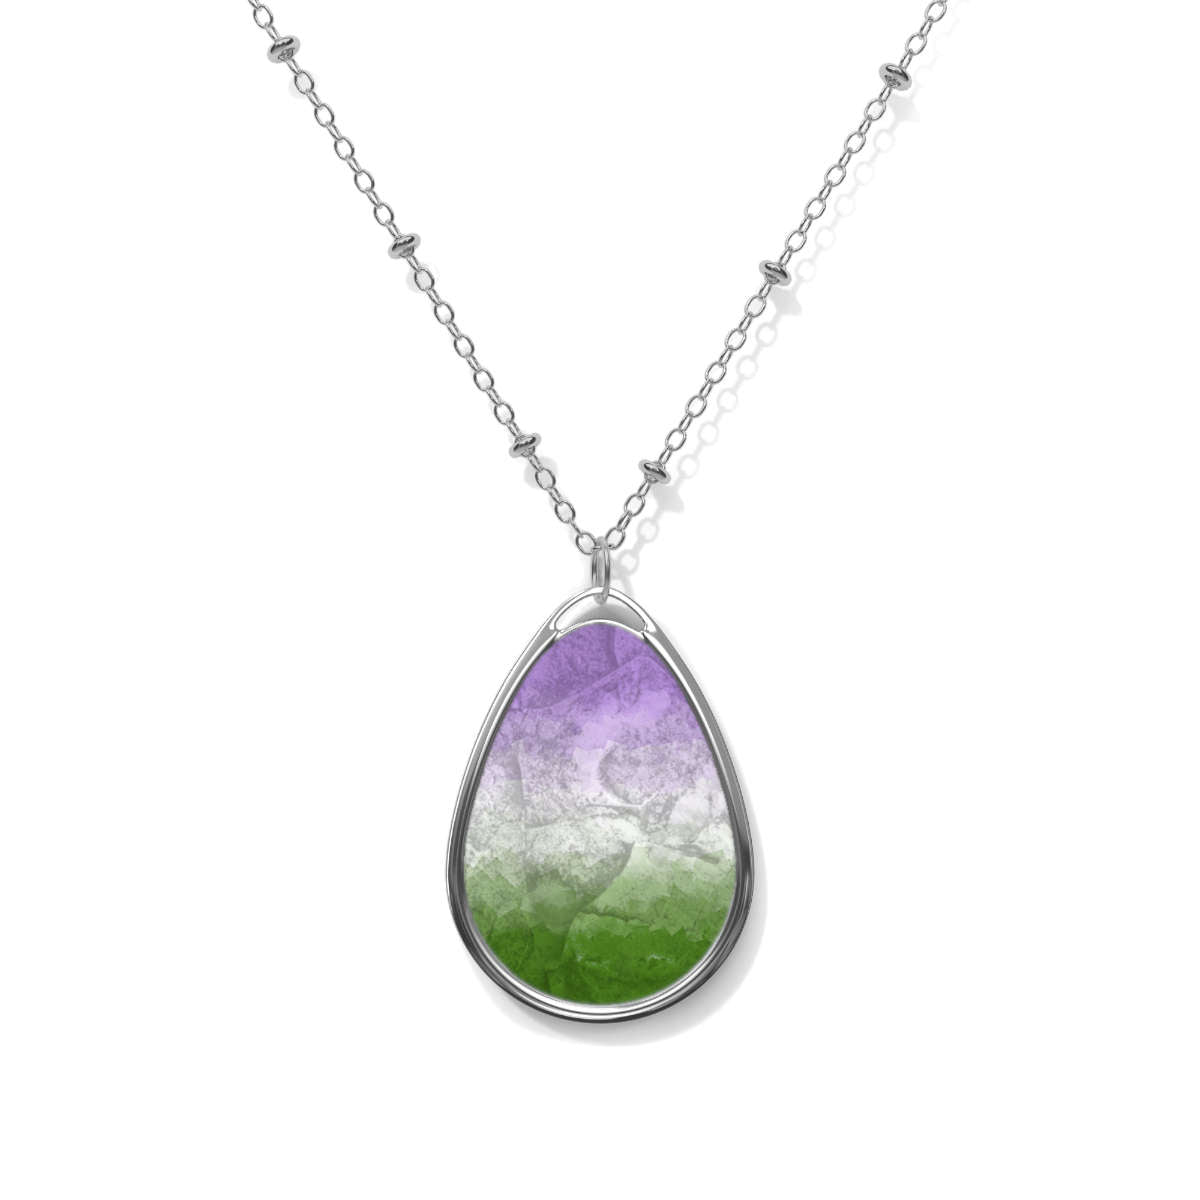 Faux Stone Gender Oval Necklace | Choose Your Gender Pride Flag Colourway